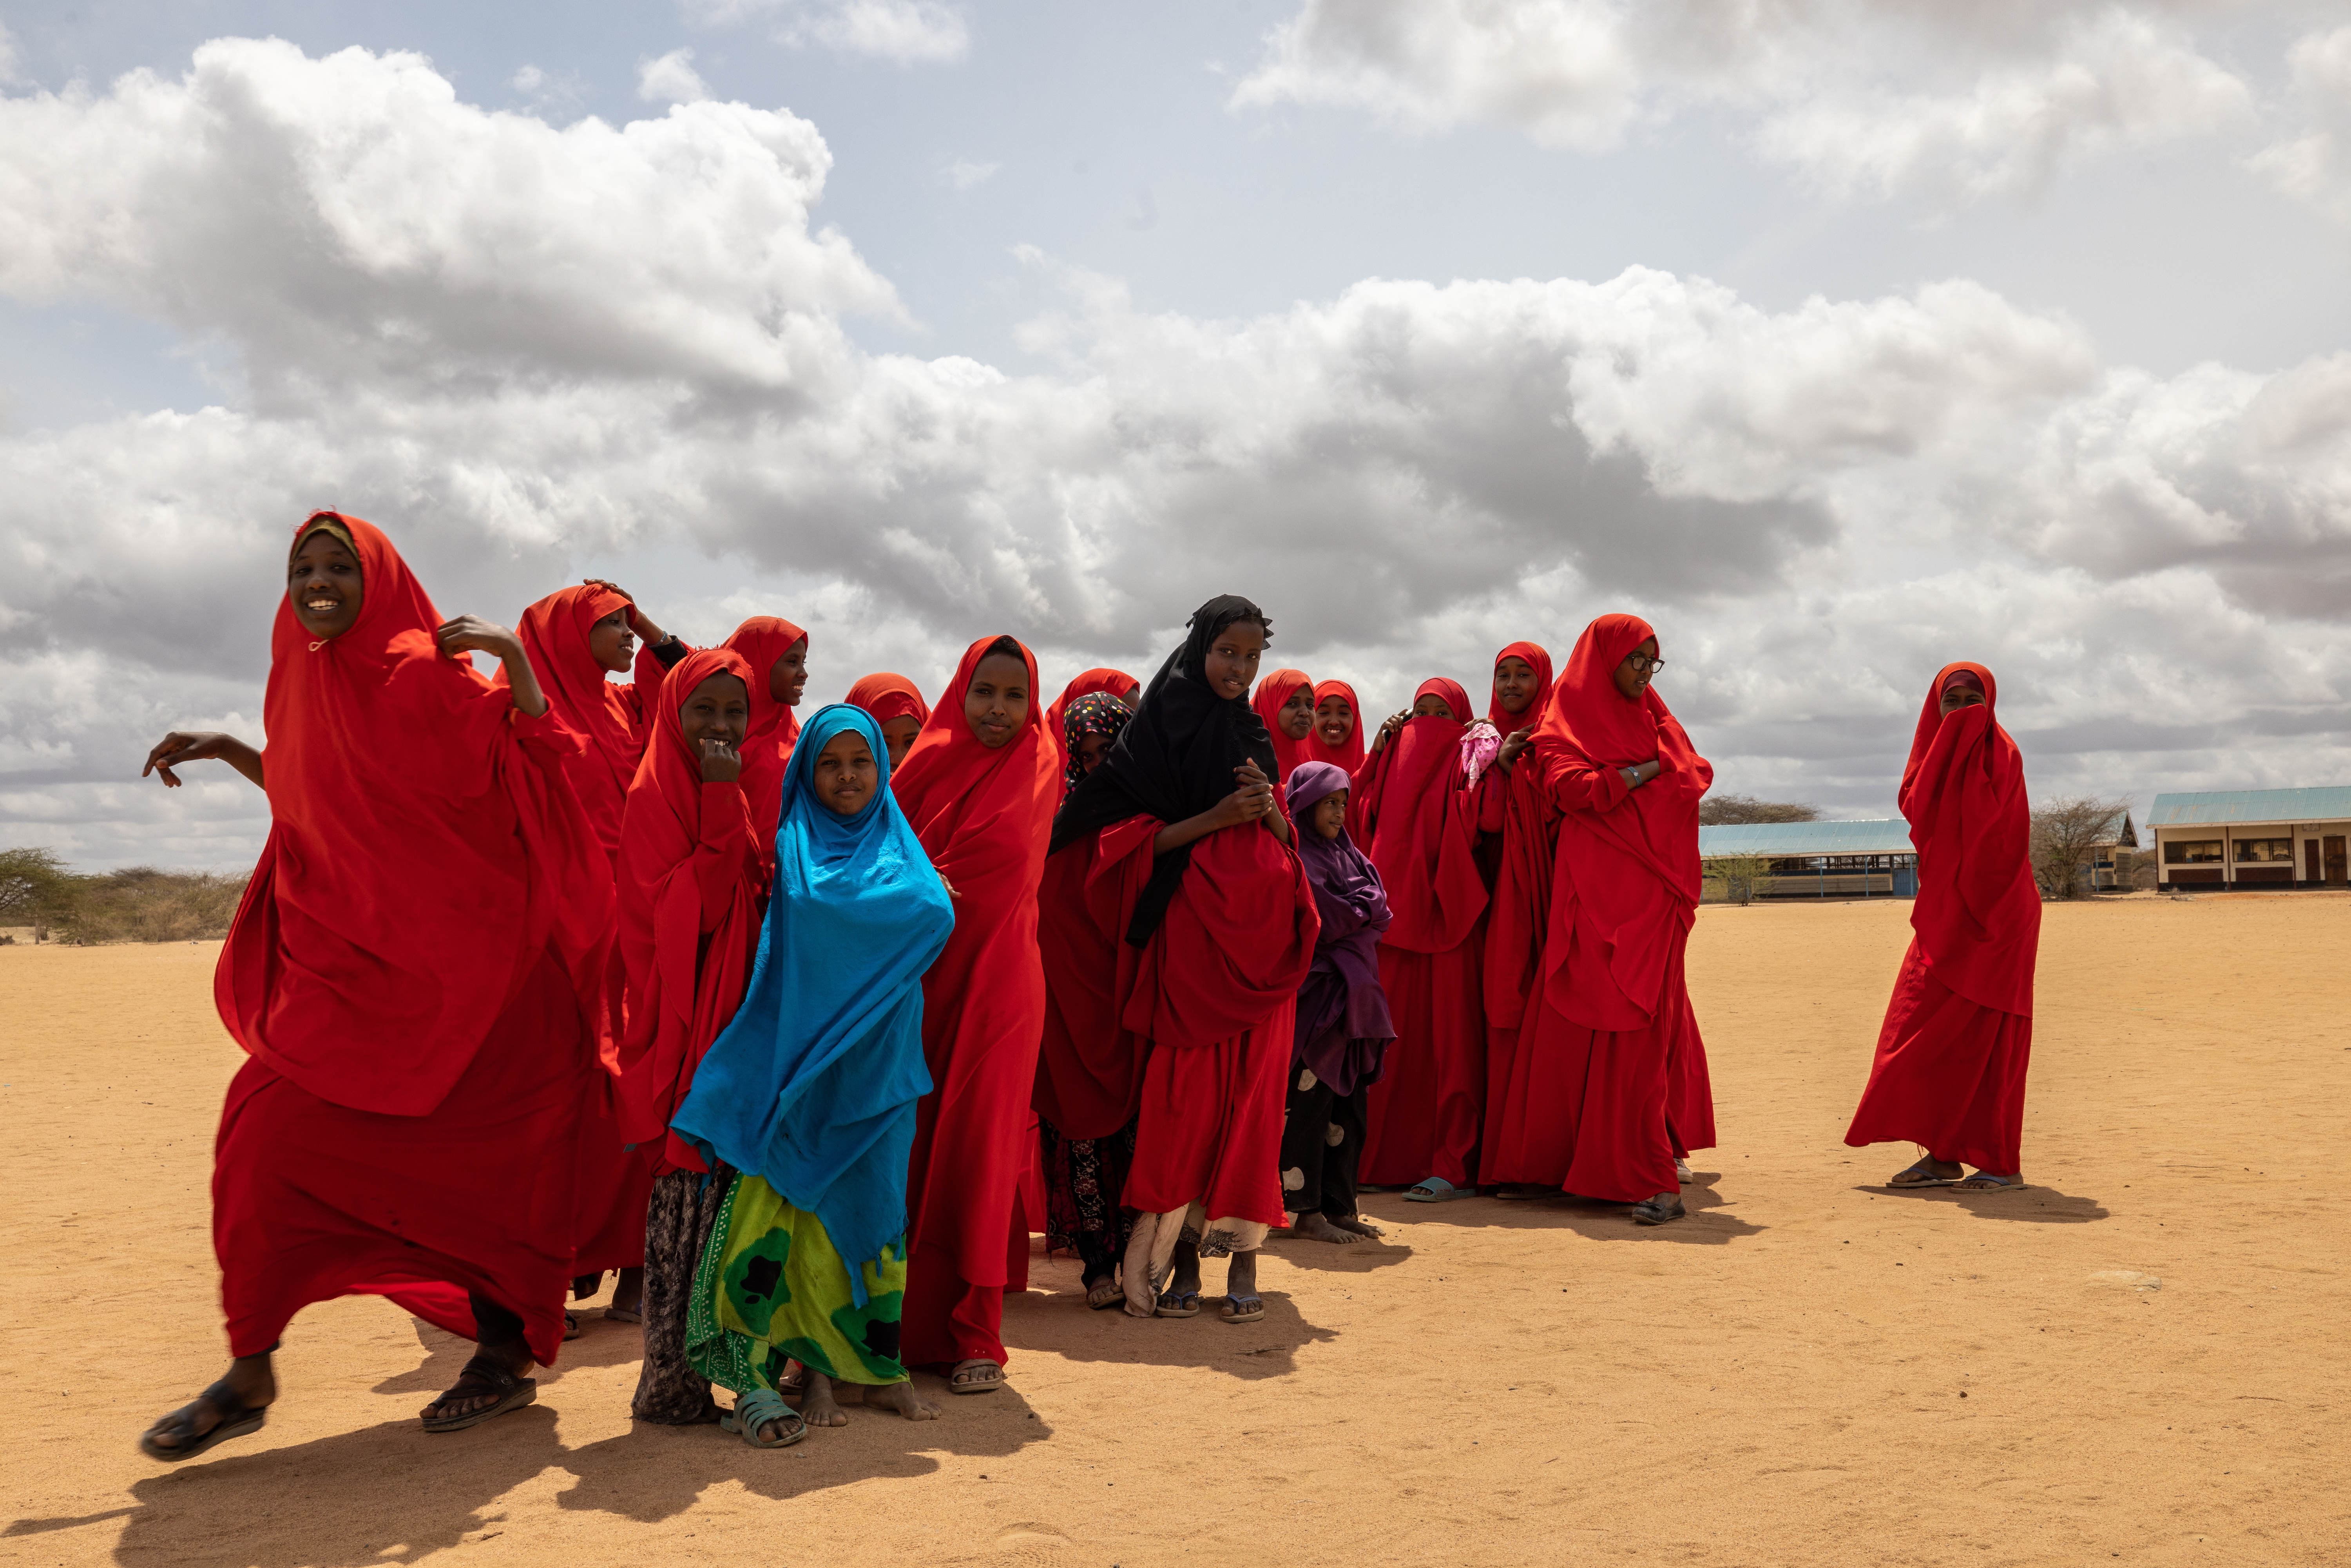 Sacrifice, loss and resilience: the women of Dadaab refugee camp